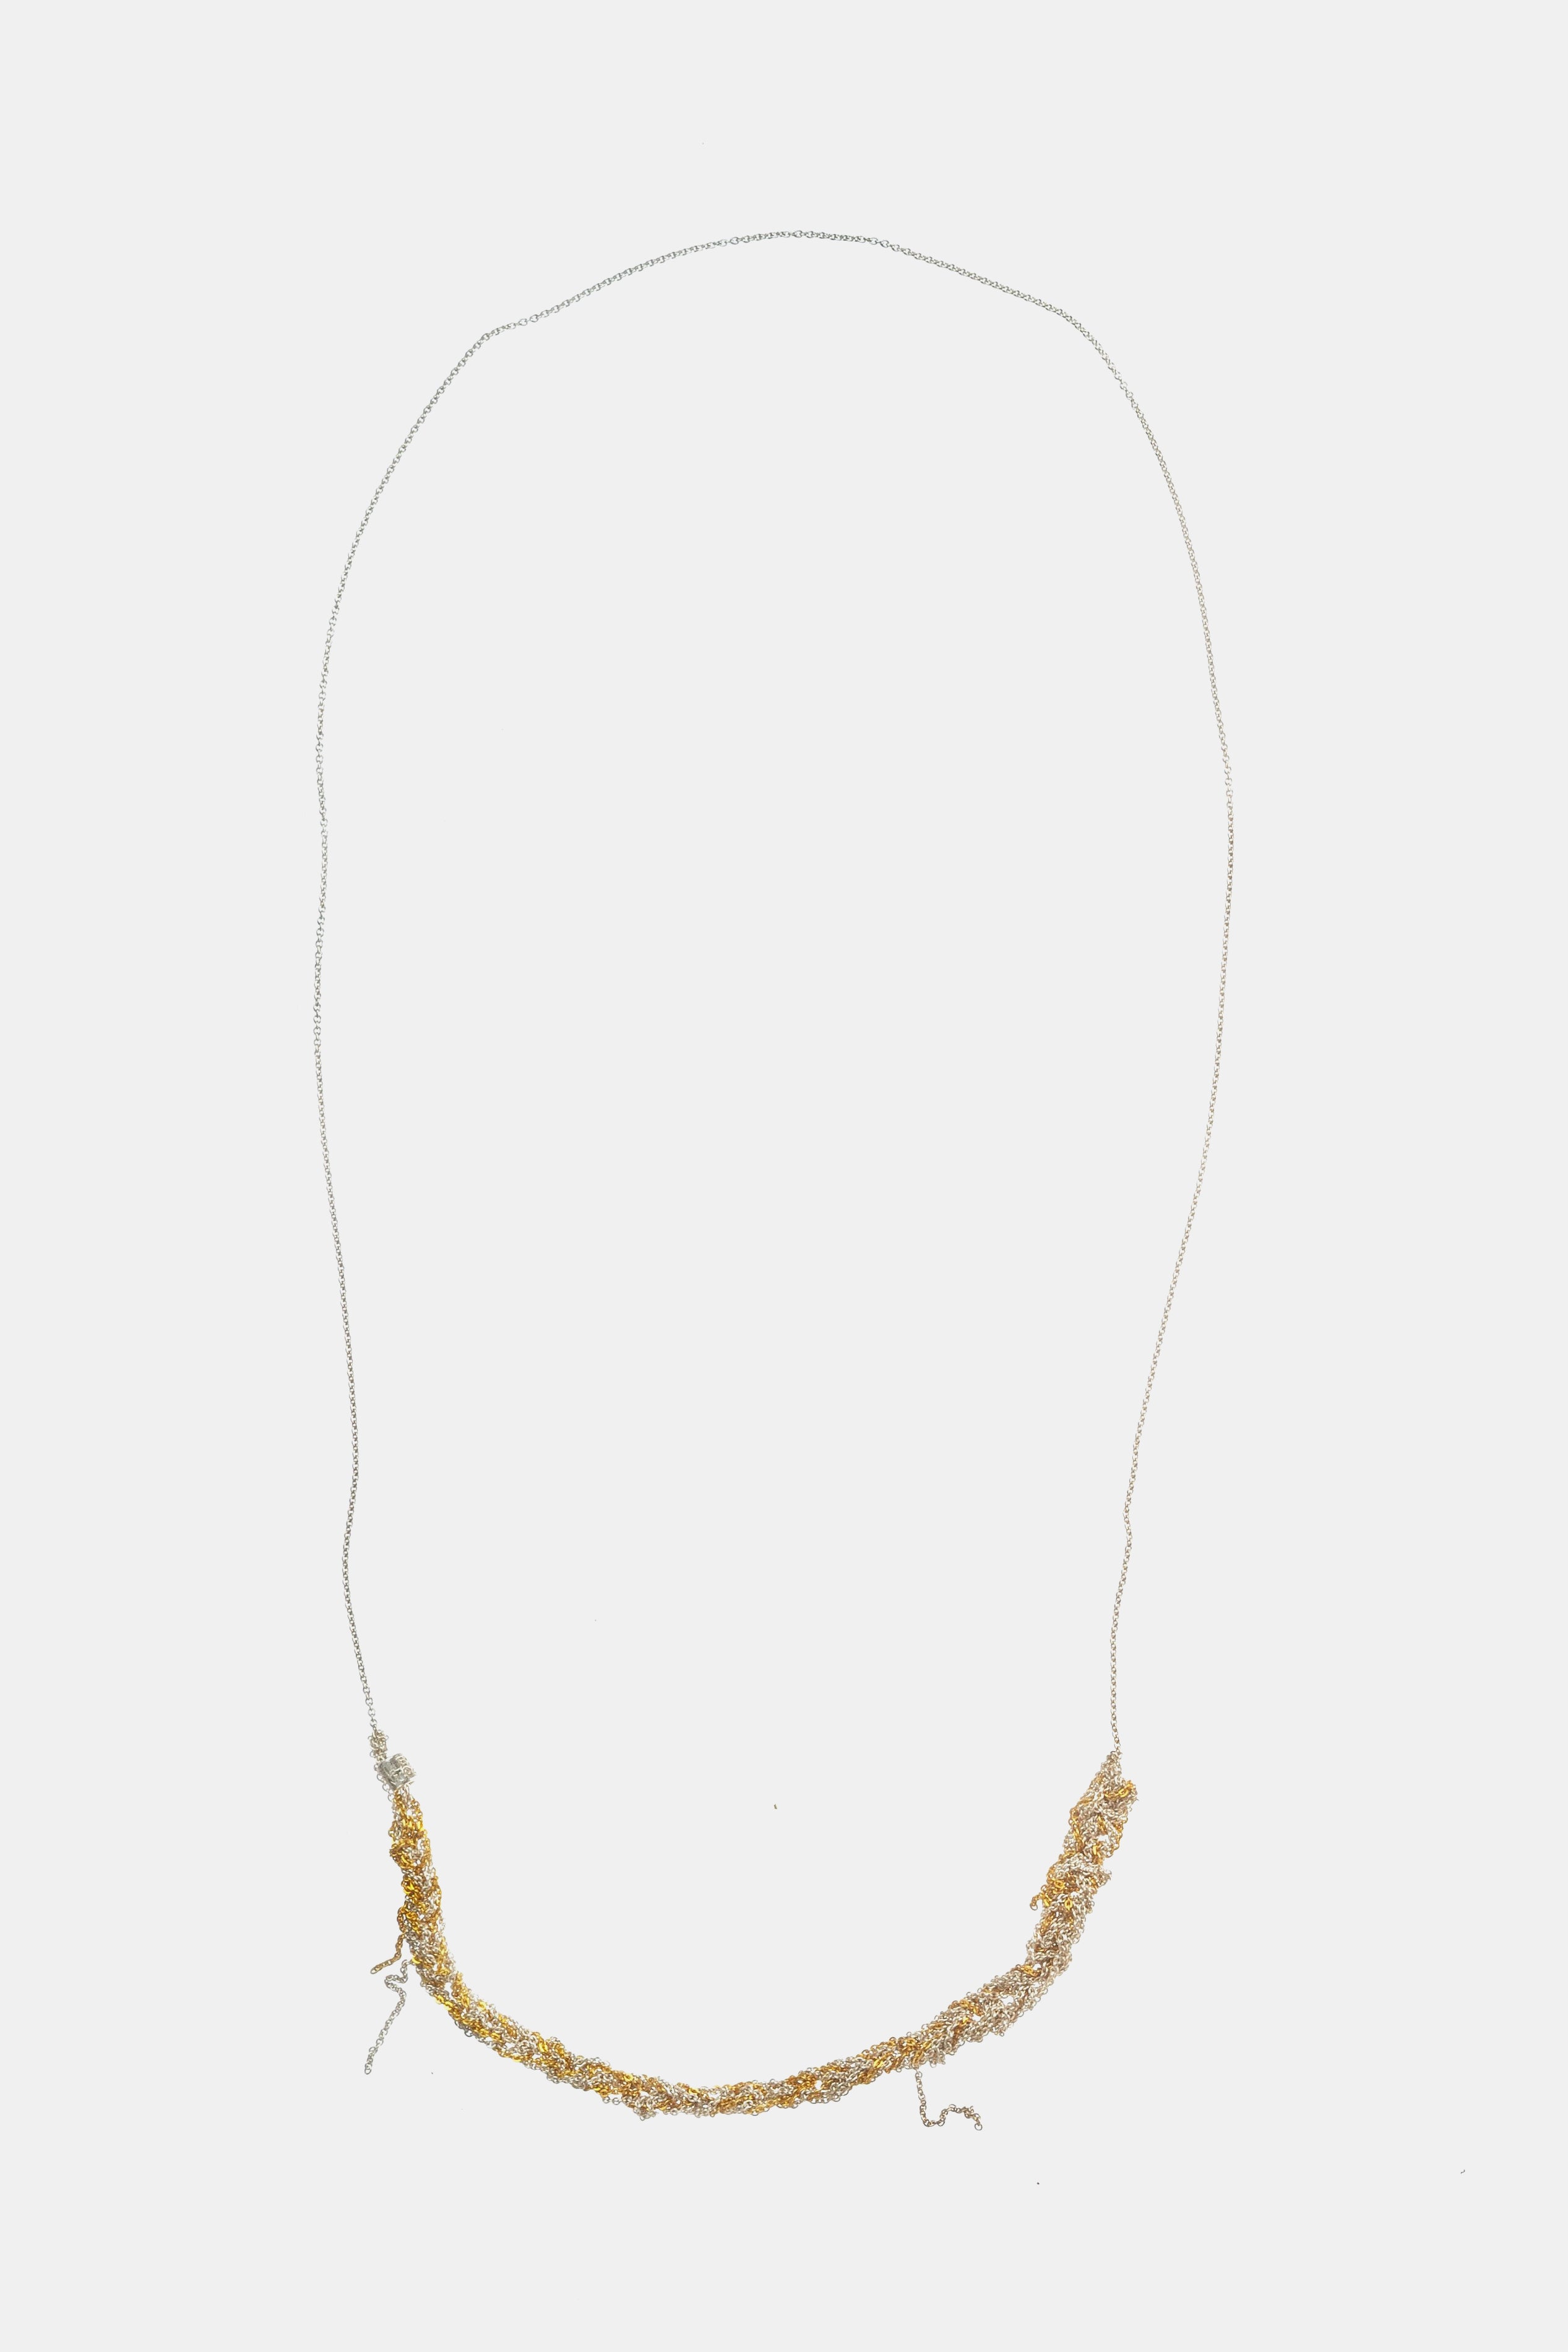 Arielle De Pinto The Skinny Necklace In Silver And Gold